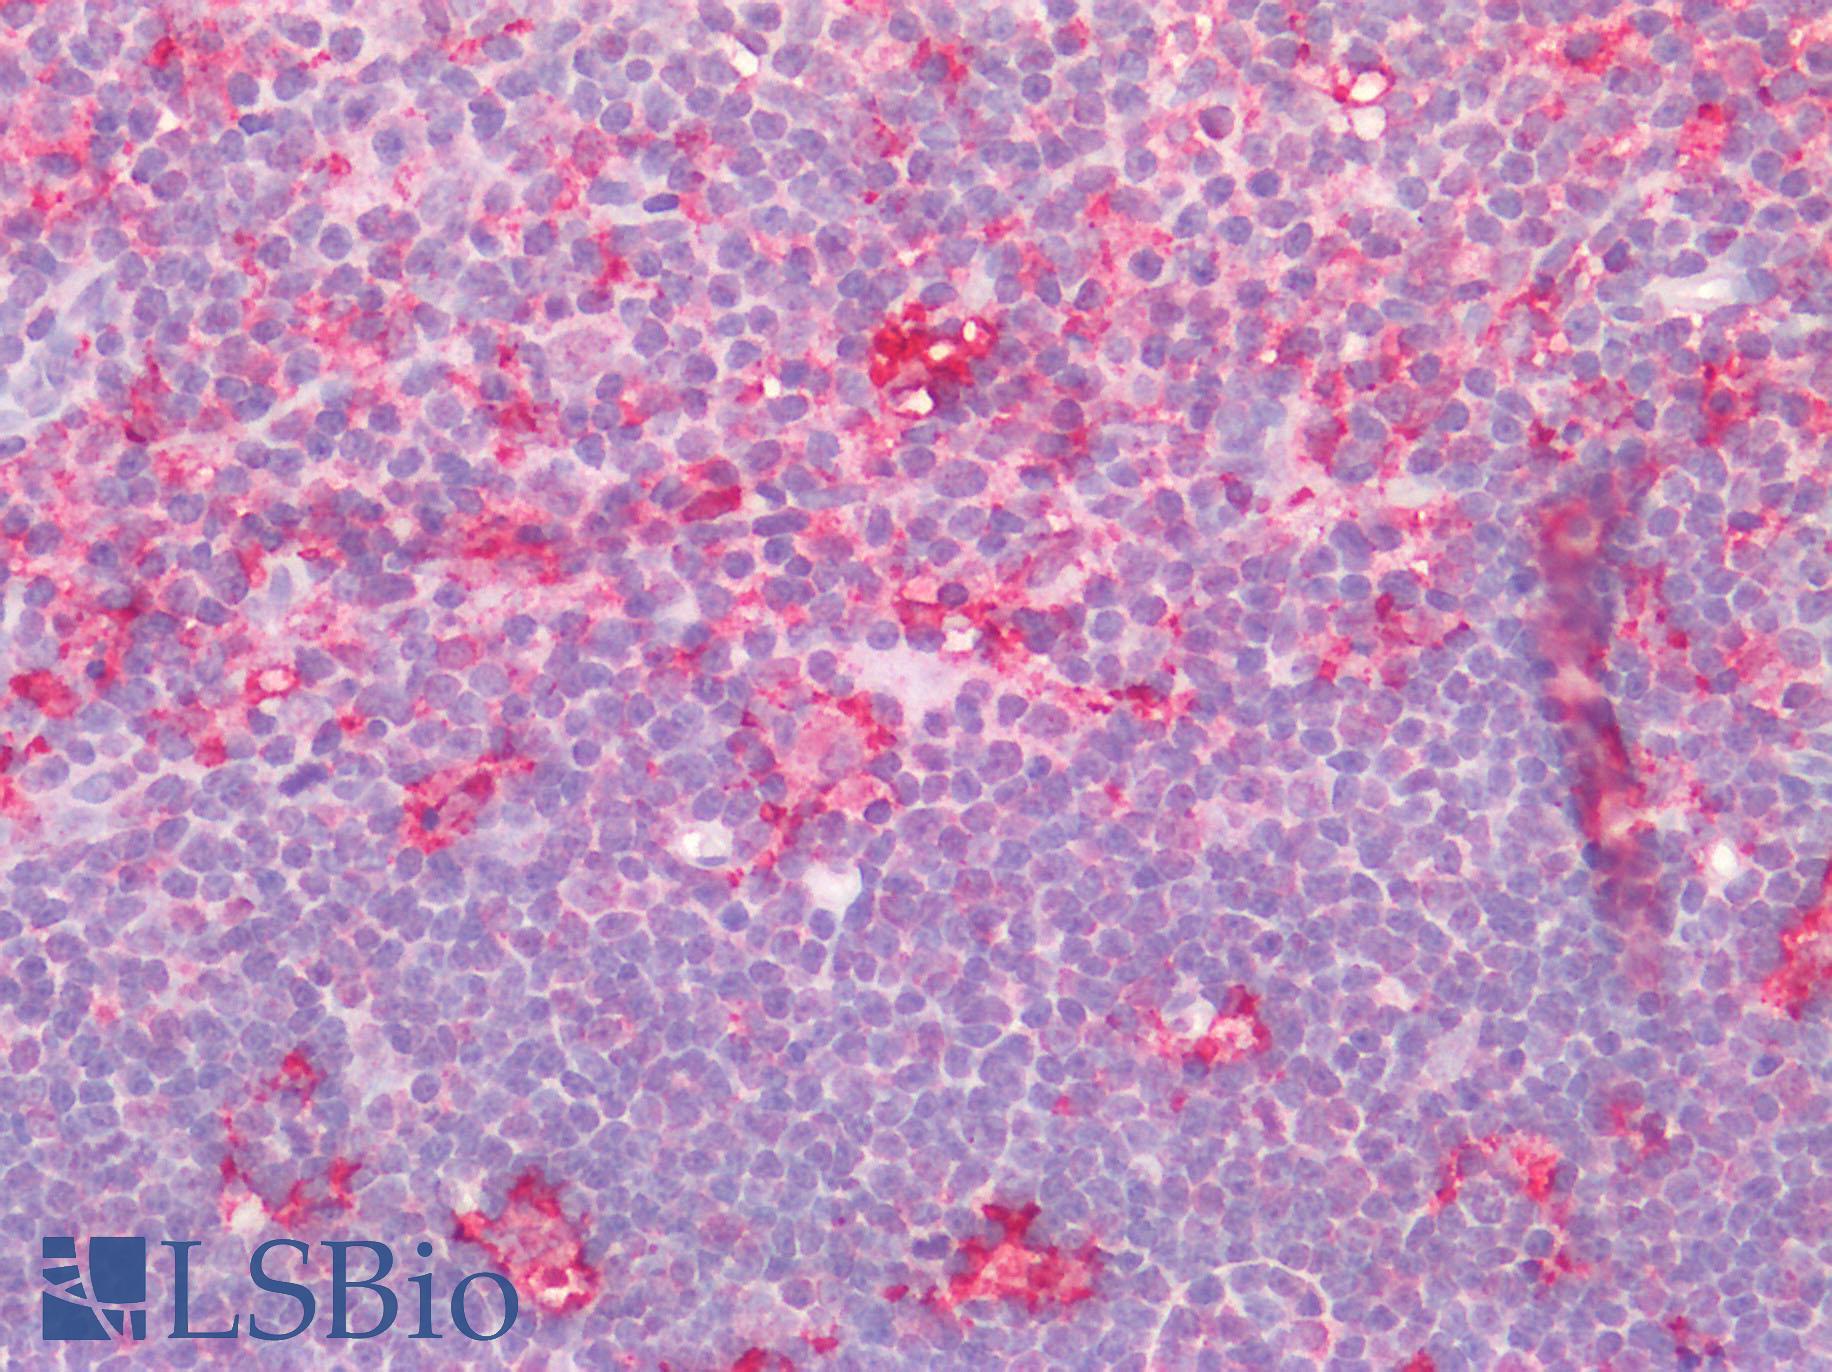 AIF1 / IBA1 Antibody - Human Thymus: Formalin-Fixed, Paraffin-Embedded (FFPE) HIER using 10 mM sodium citrate buffer pH 6.0